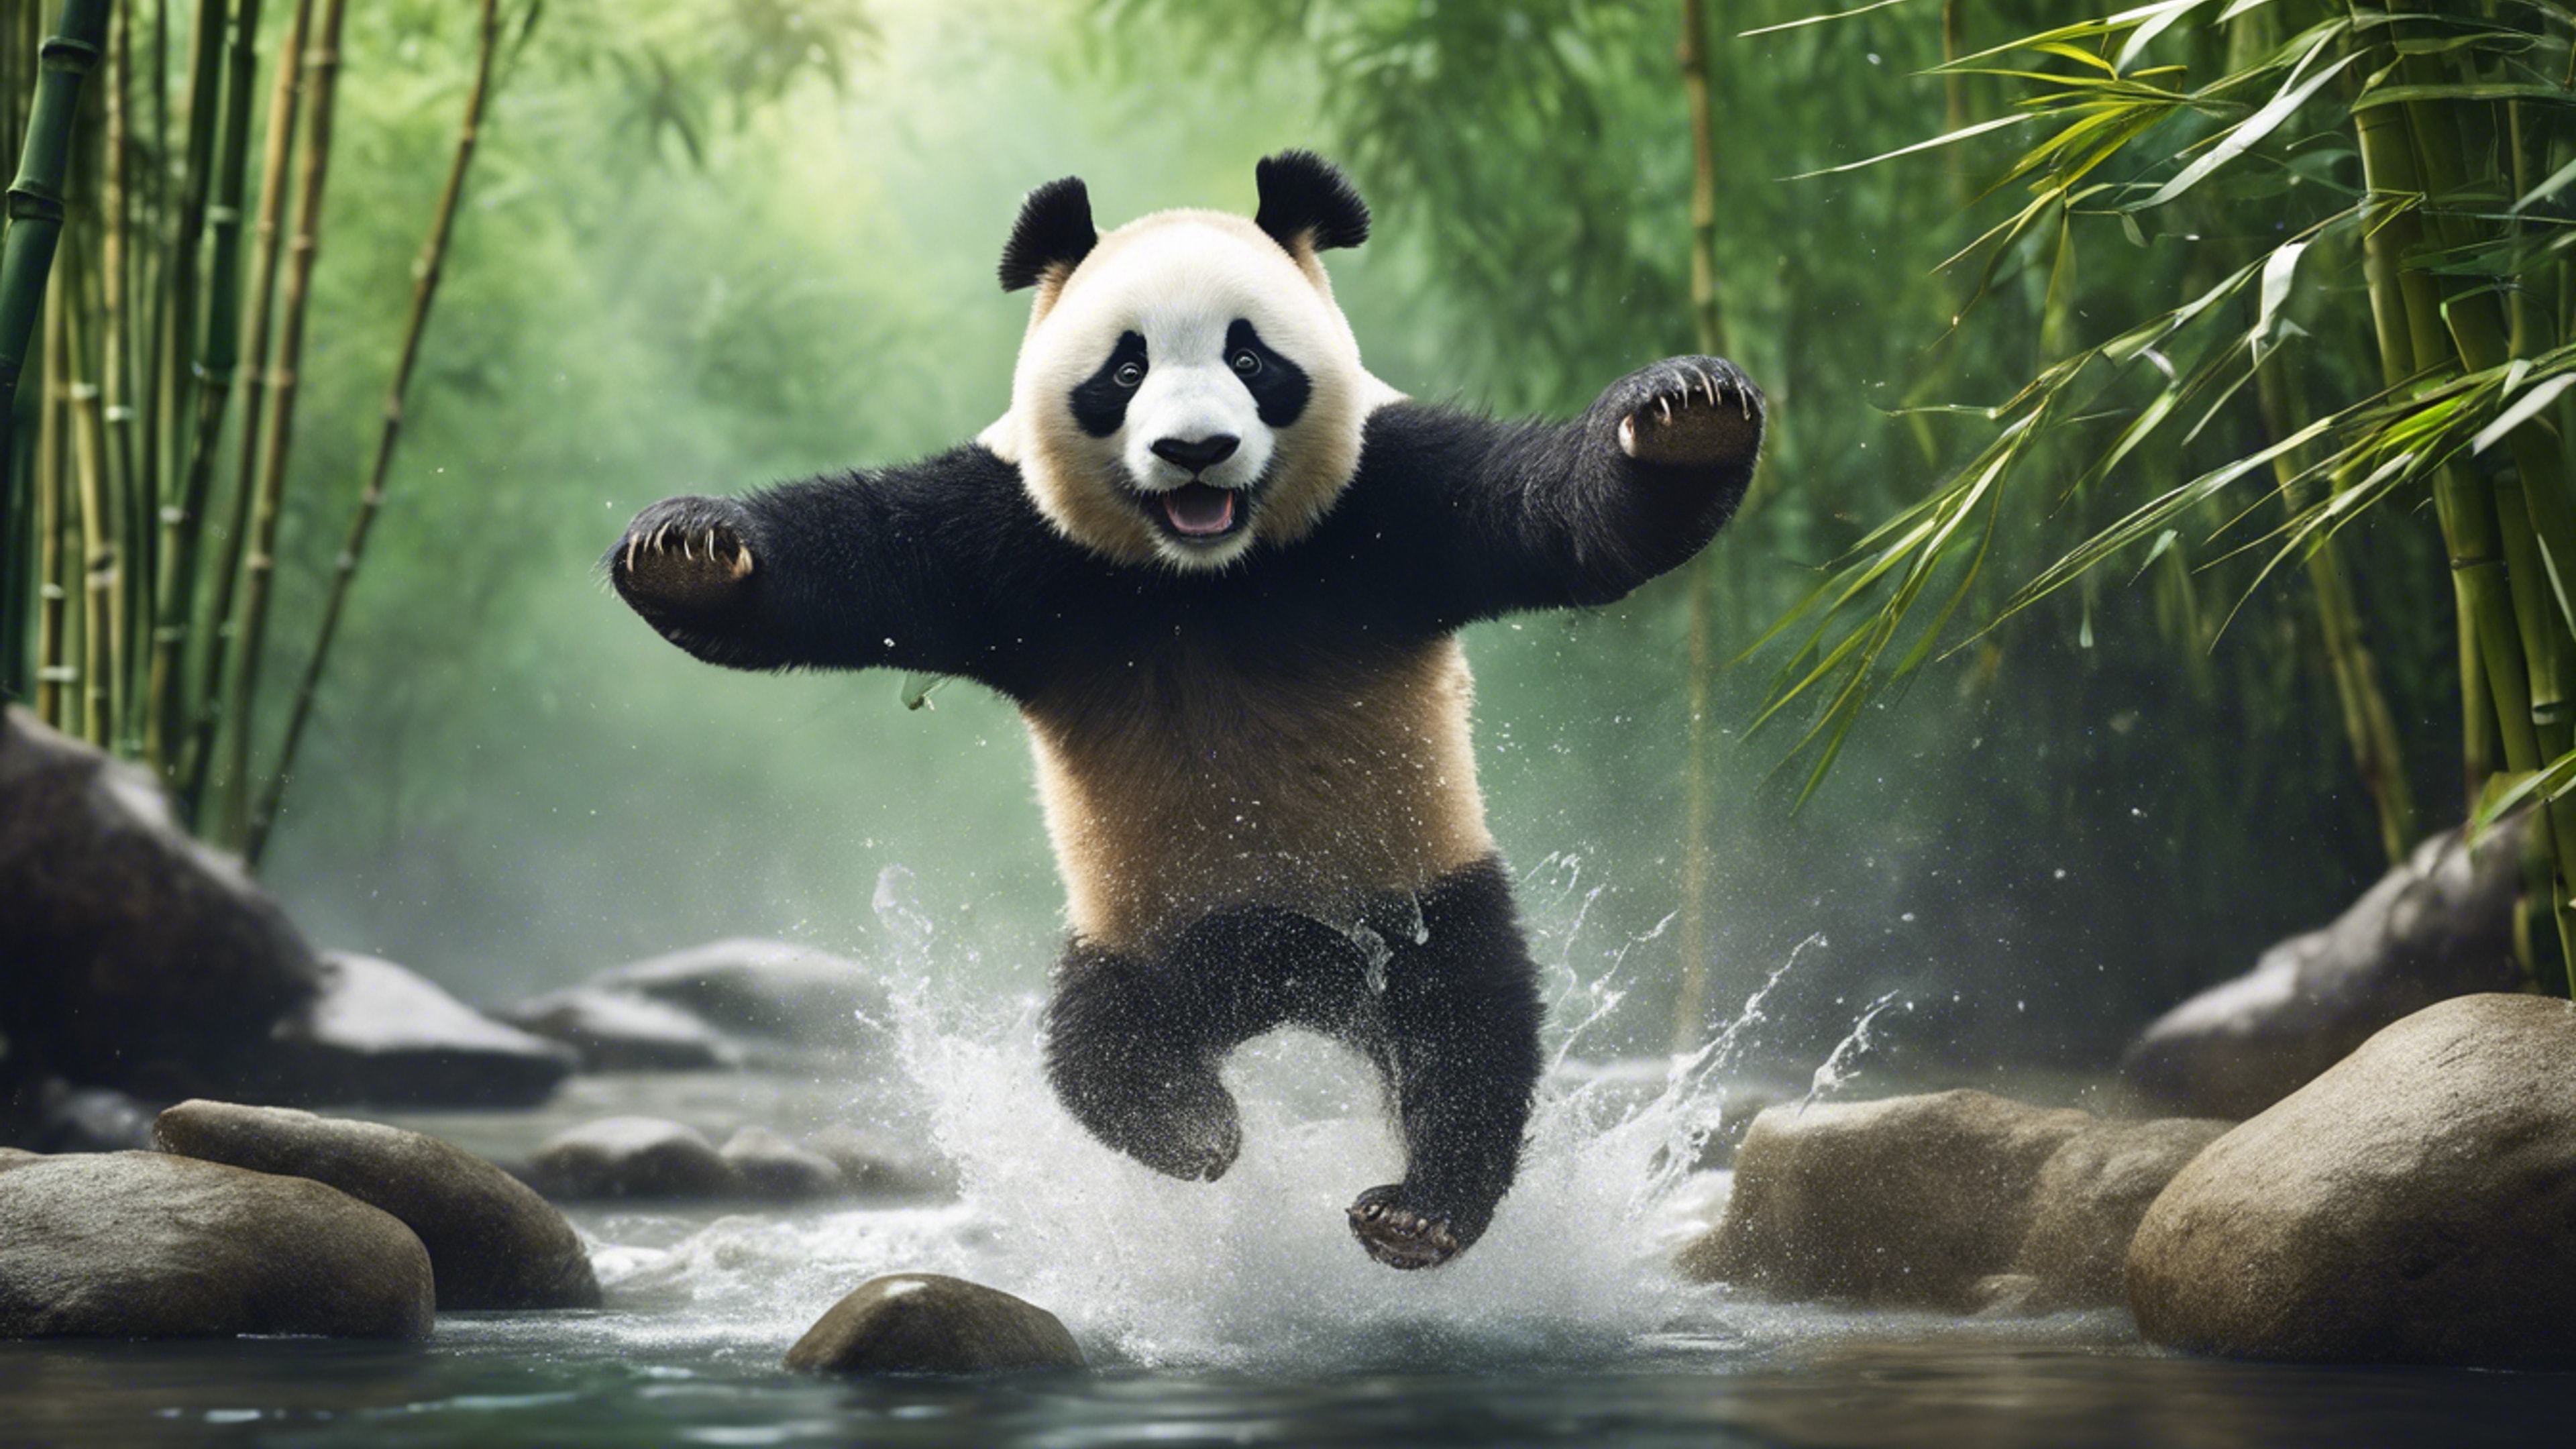 An adventurous panda leaping across a rapid creek with bamboo forests in the backdrop. Tapet[317eaaa1af264f04a7c3]